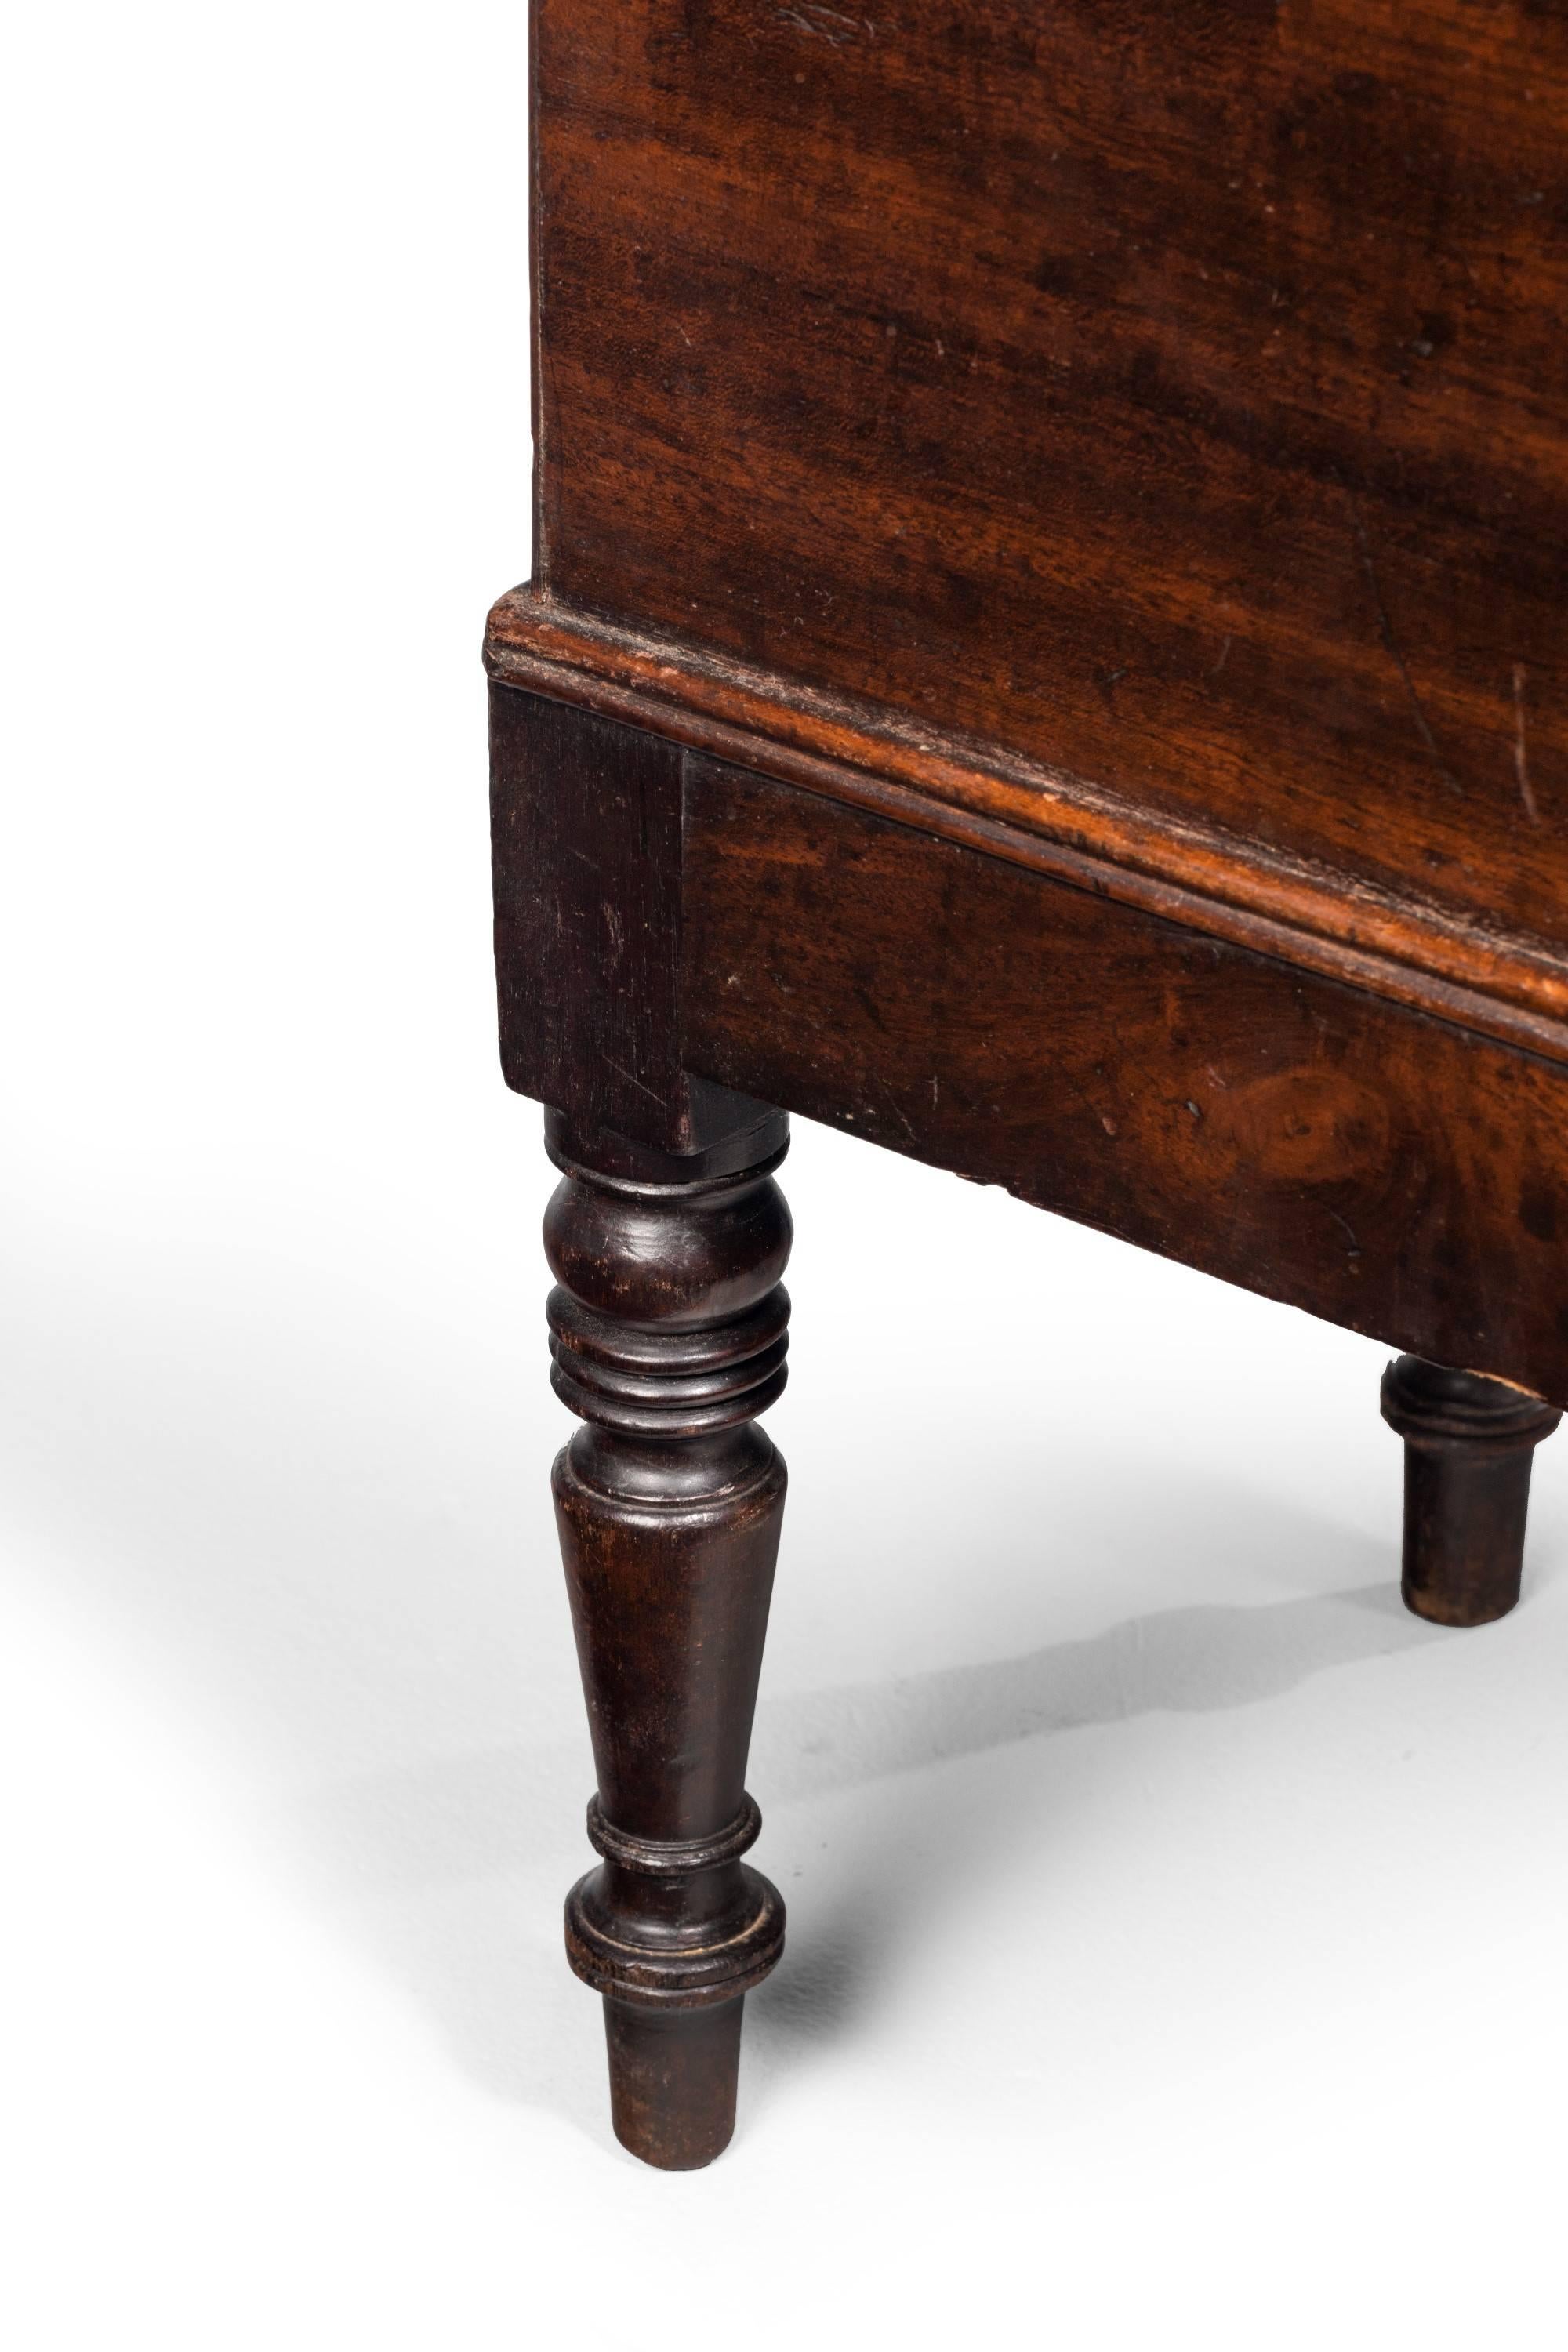 George III Period Mahogany Cellarette In Excellent Condition In Peterborough, Northamptonshire